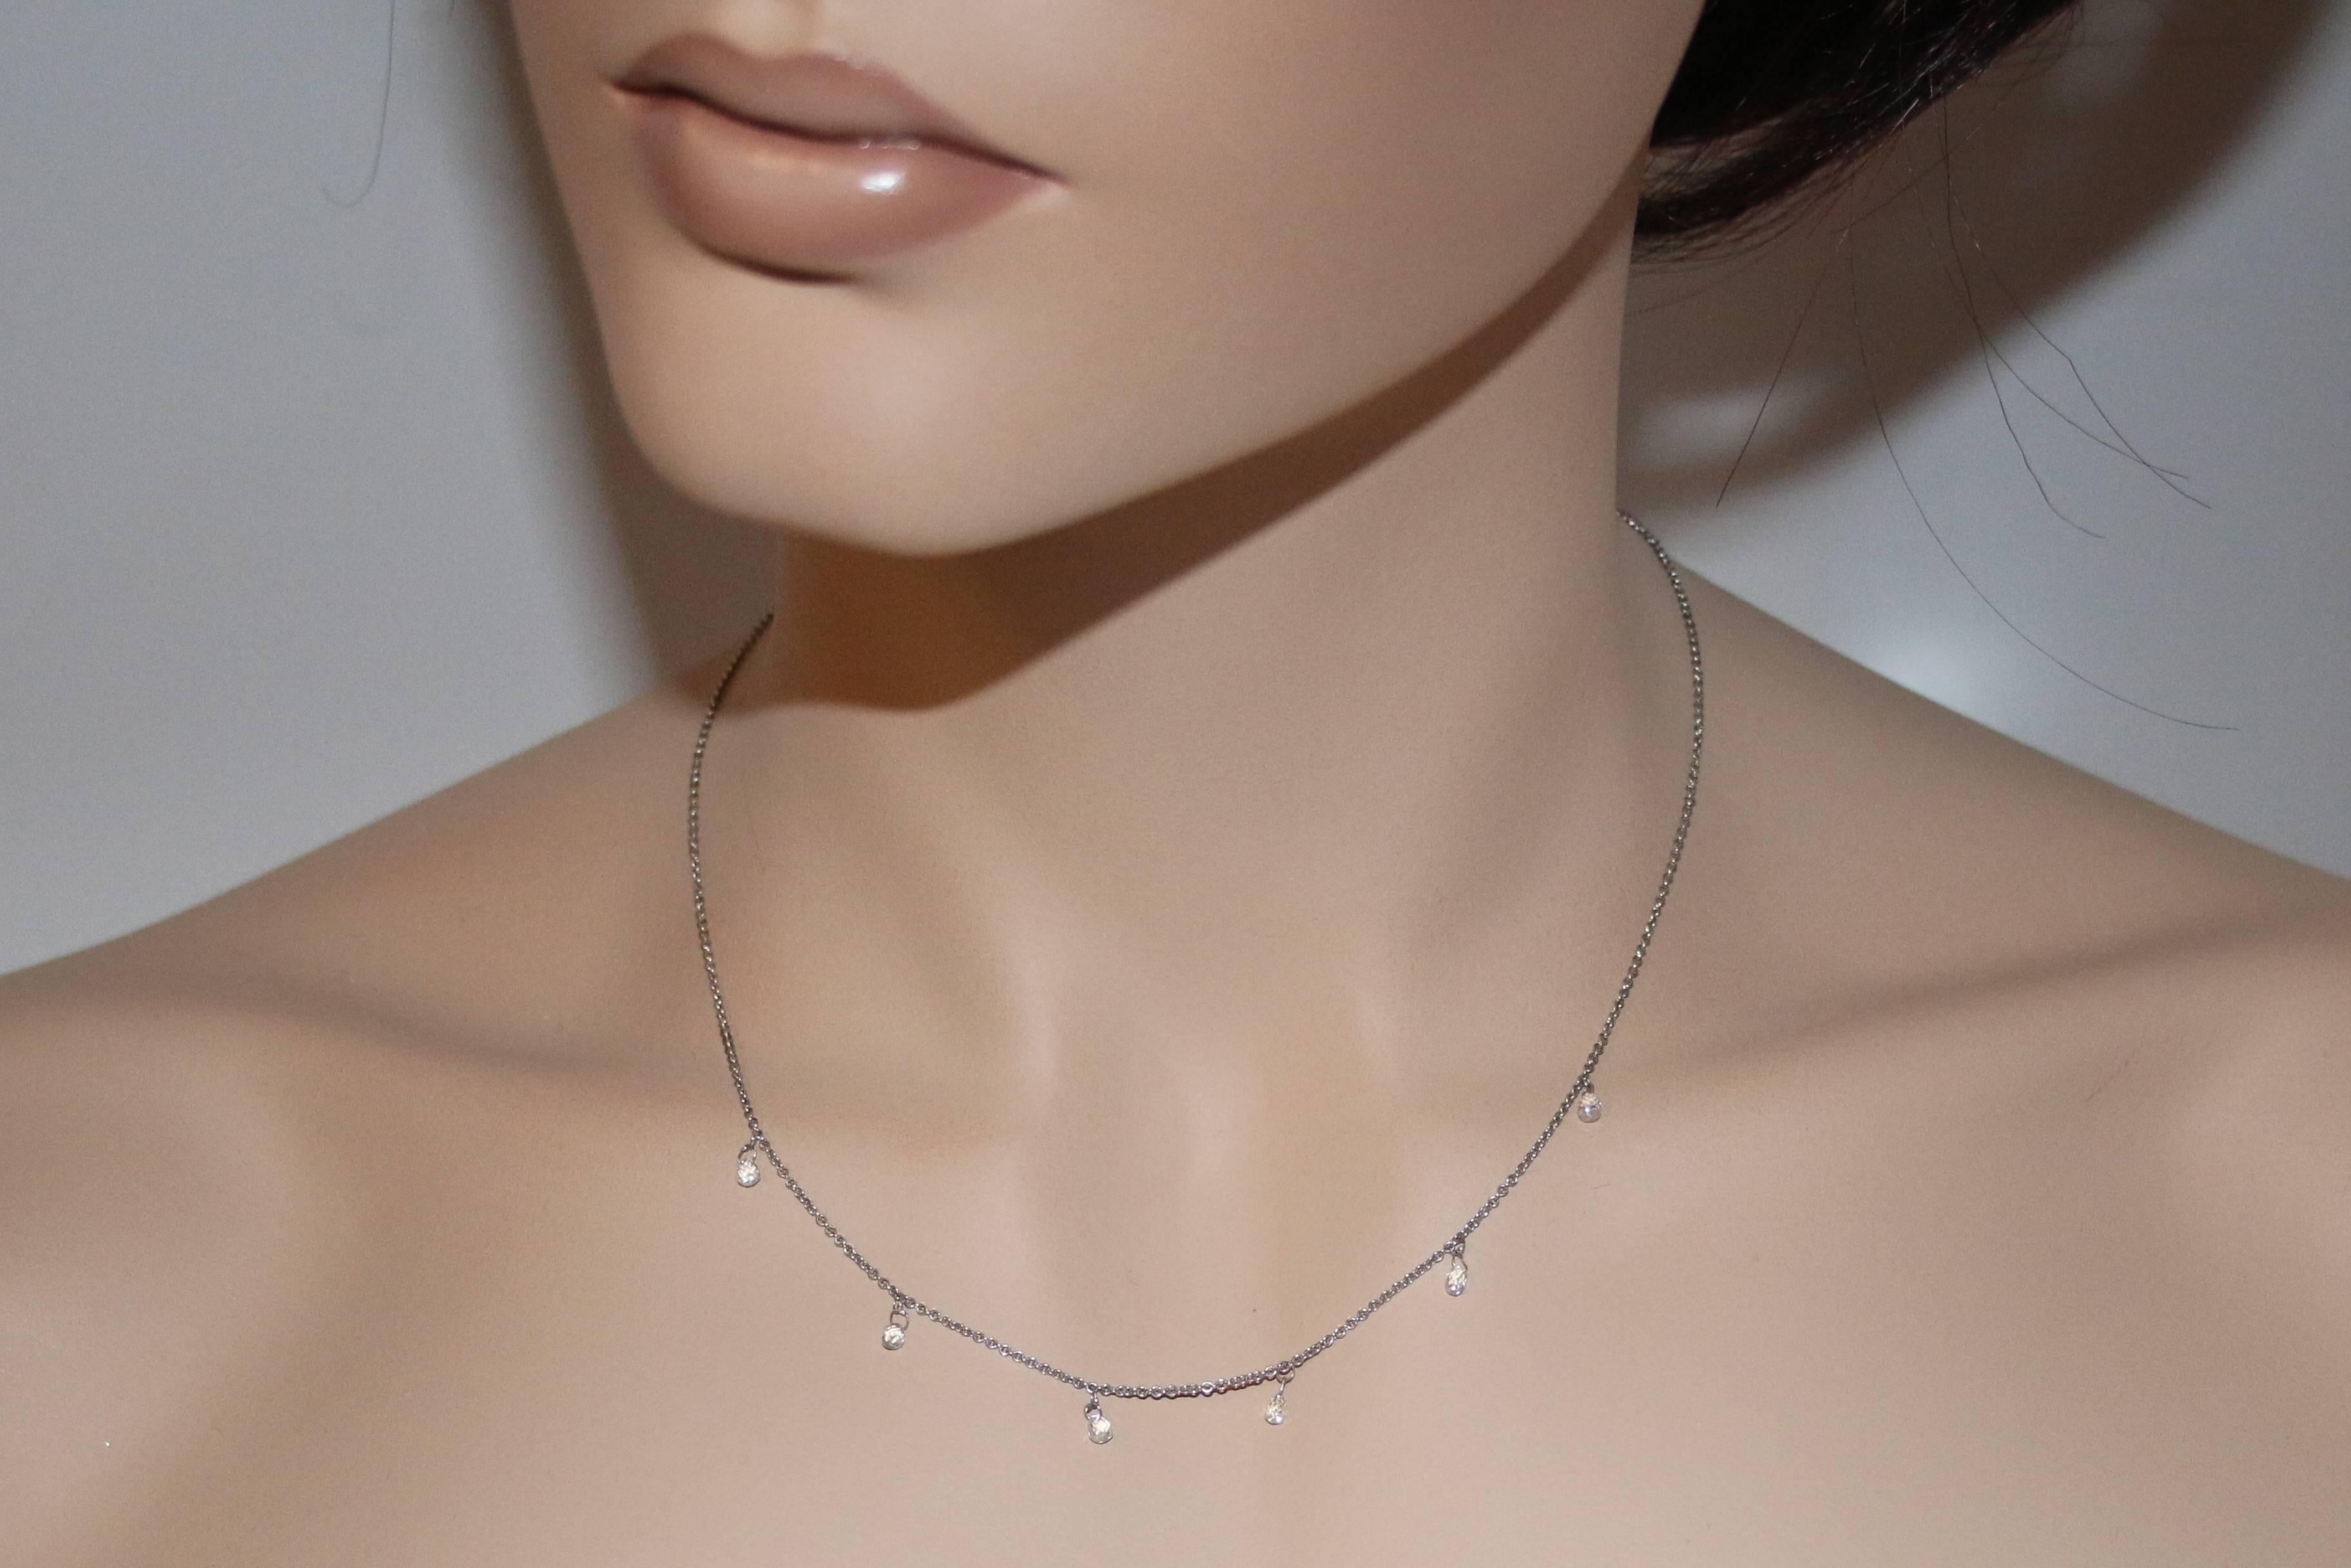 The necklace is 14K White Gold
There are 1.20 Carats in Diamonds G/H VS
The necklace is 16